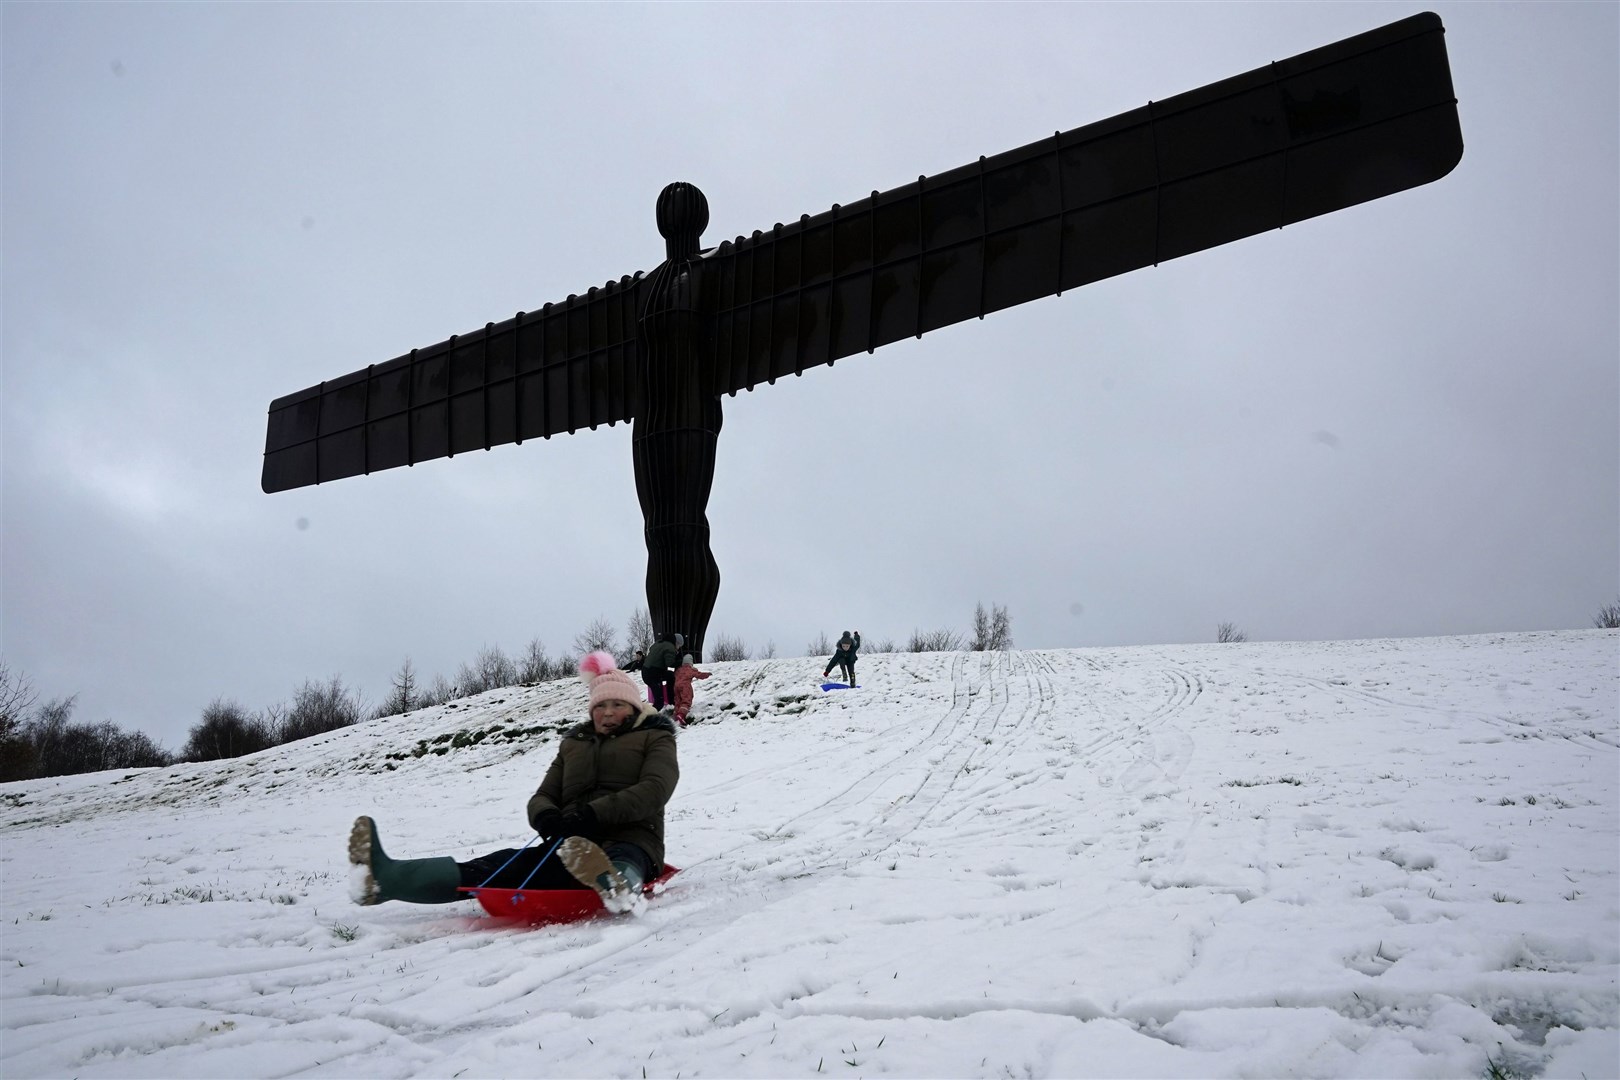 Sledgers have fun in the snow surrounding the Angel of the North near Gateshead, Tyne and Wear (Owen Humphreys/PA)